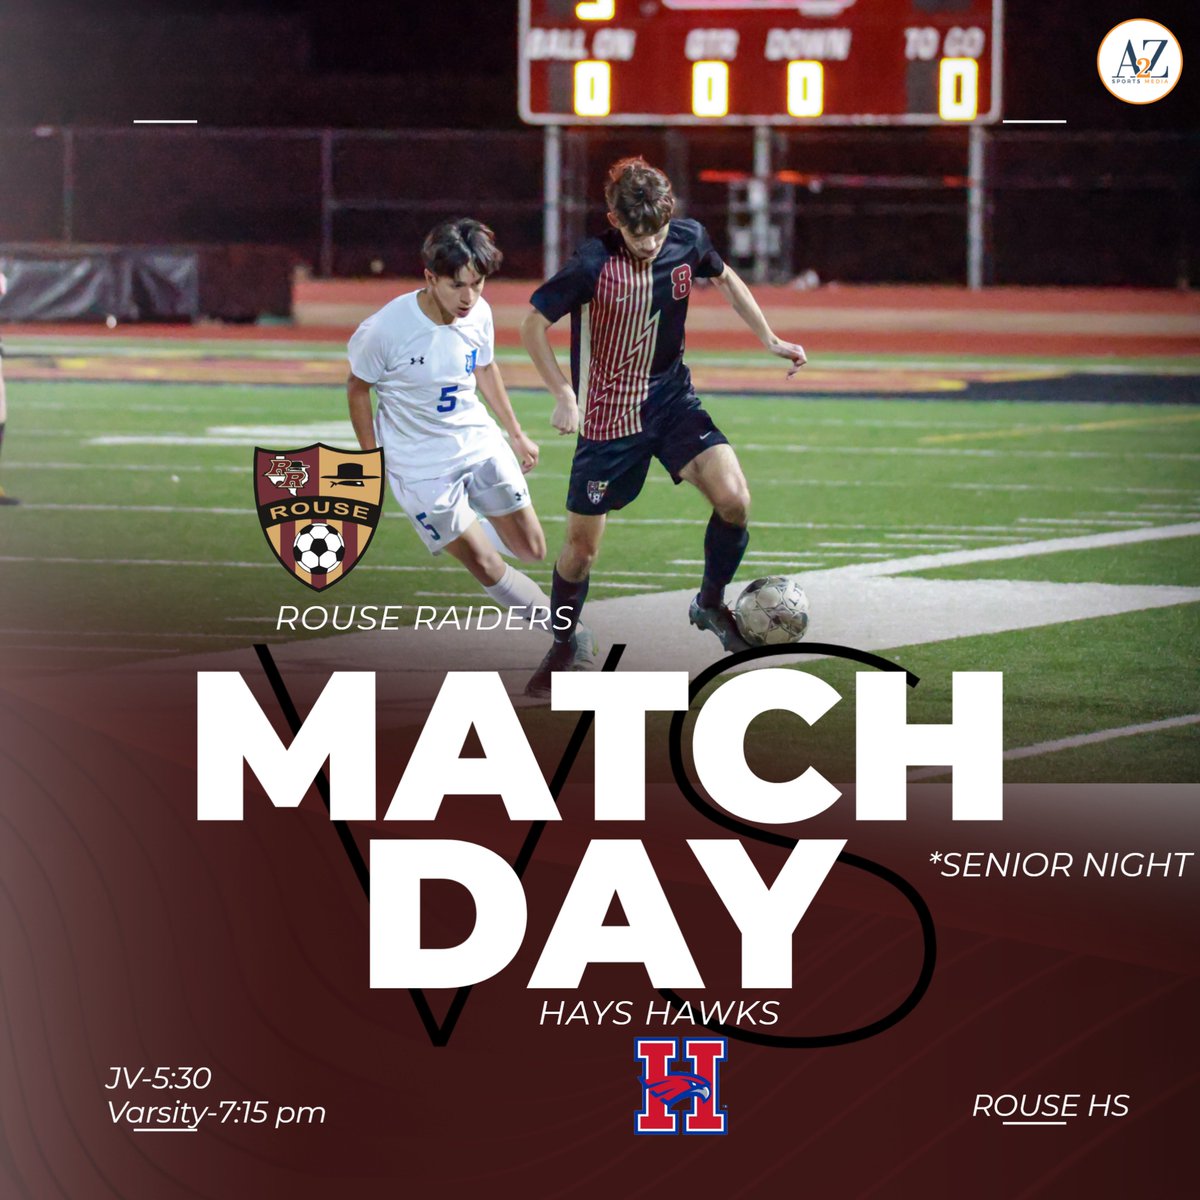 It's Senior Night & Match Day for @RouseSoccer @RouseScrBooster @DKnight111